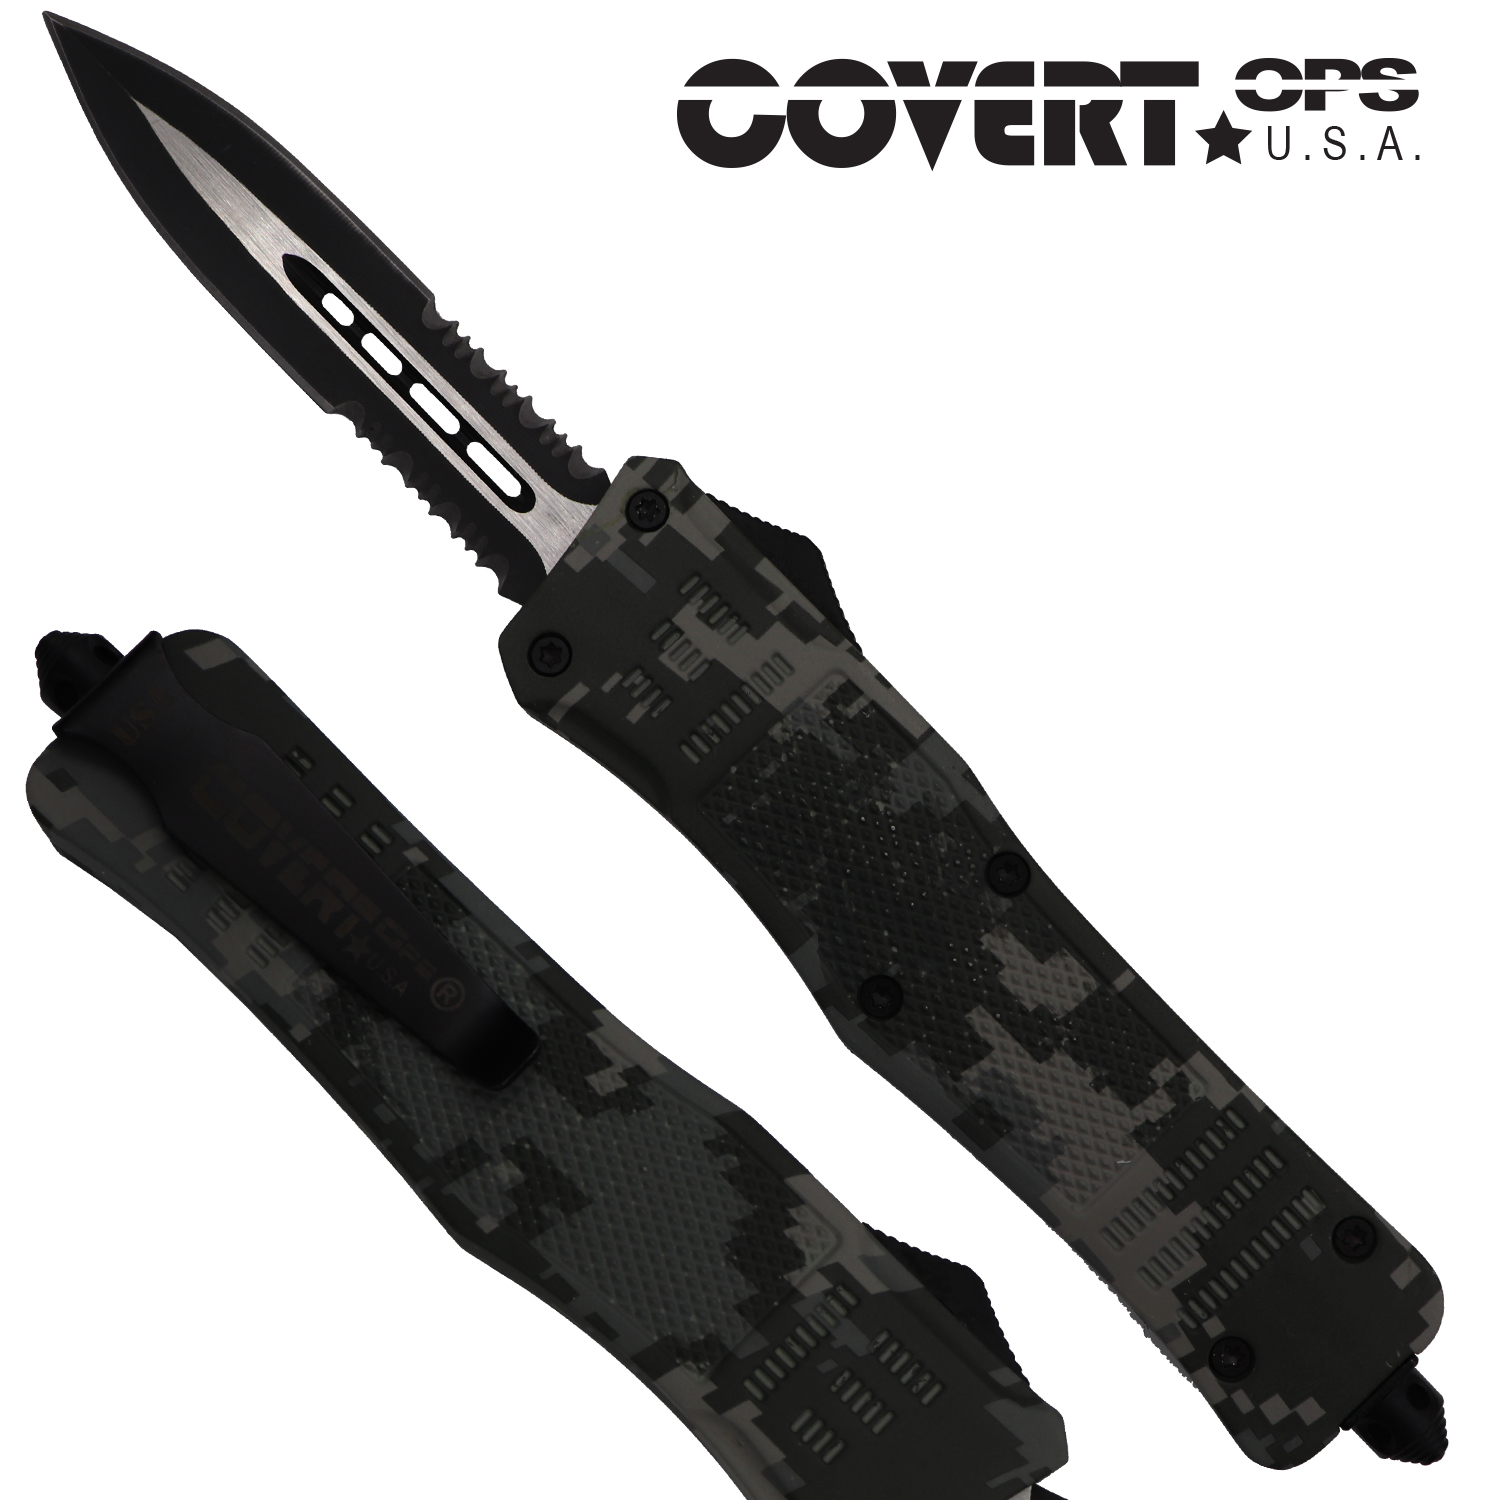 Covert OPS USA OTF Automatic Knife 9 inch overall Digi Camo Handle Two Tone Double Edge D2 Steel Blade